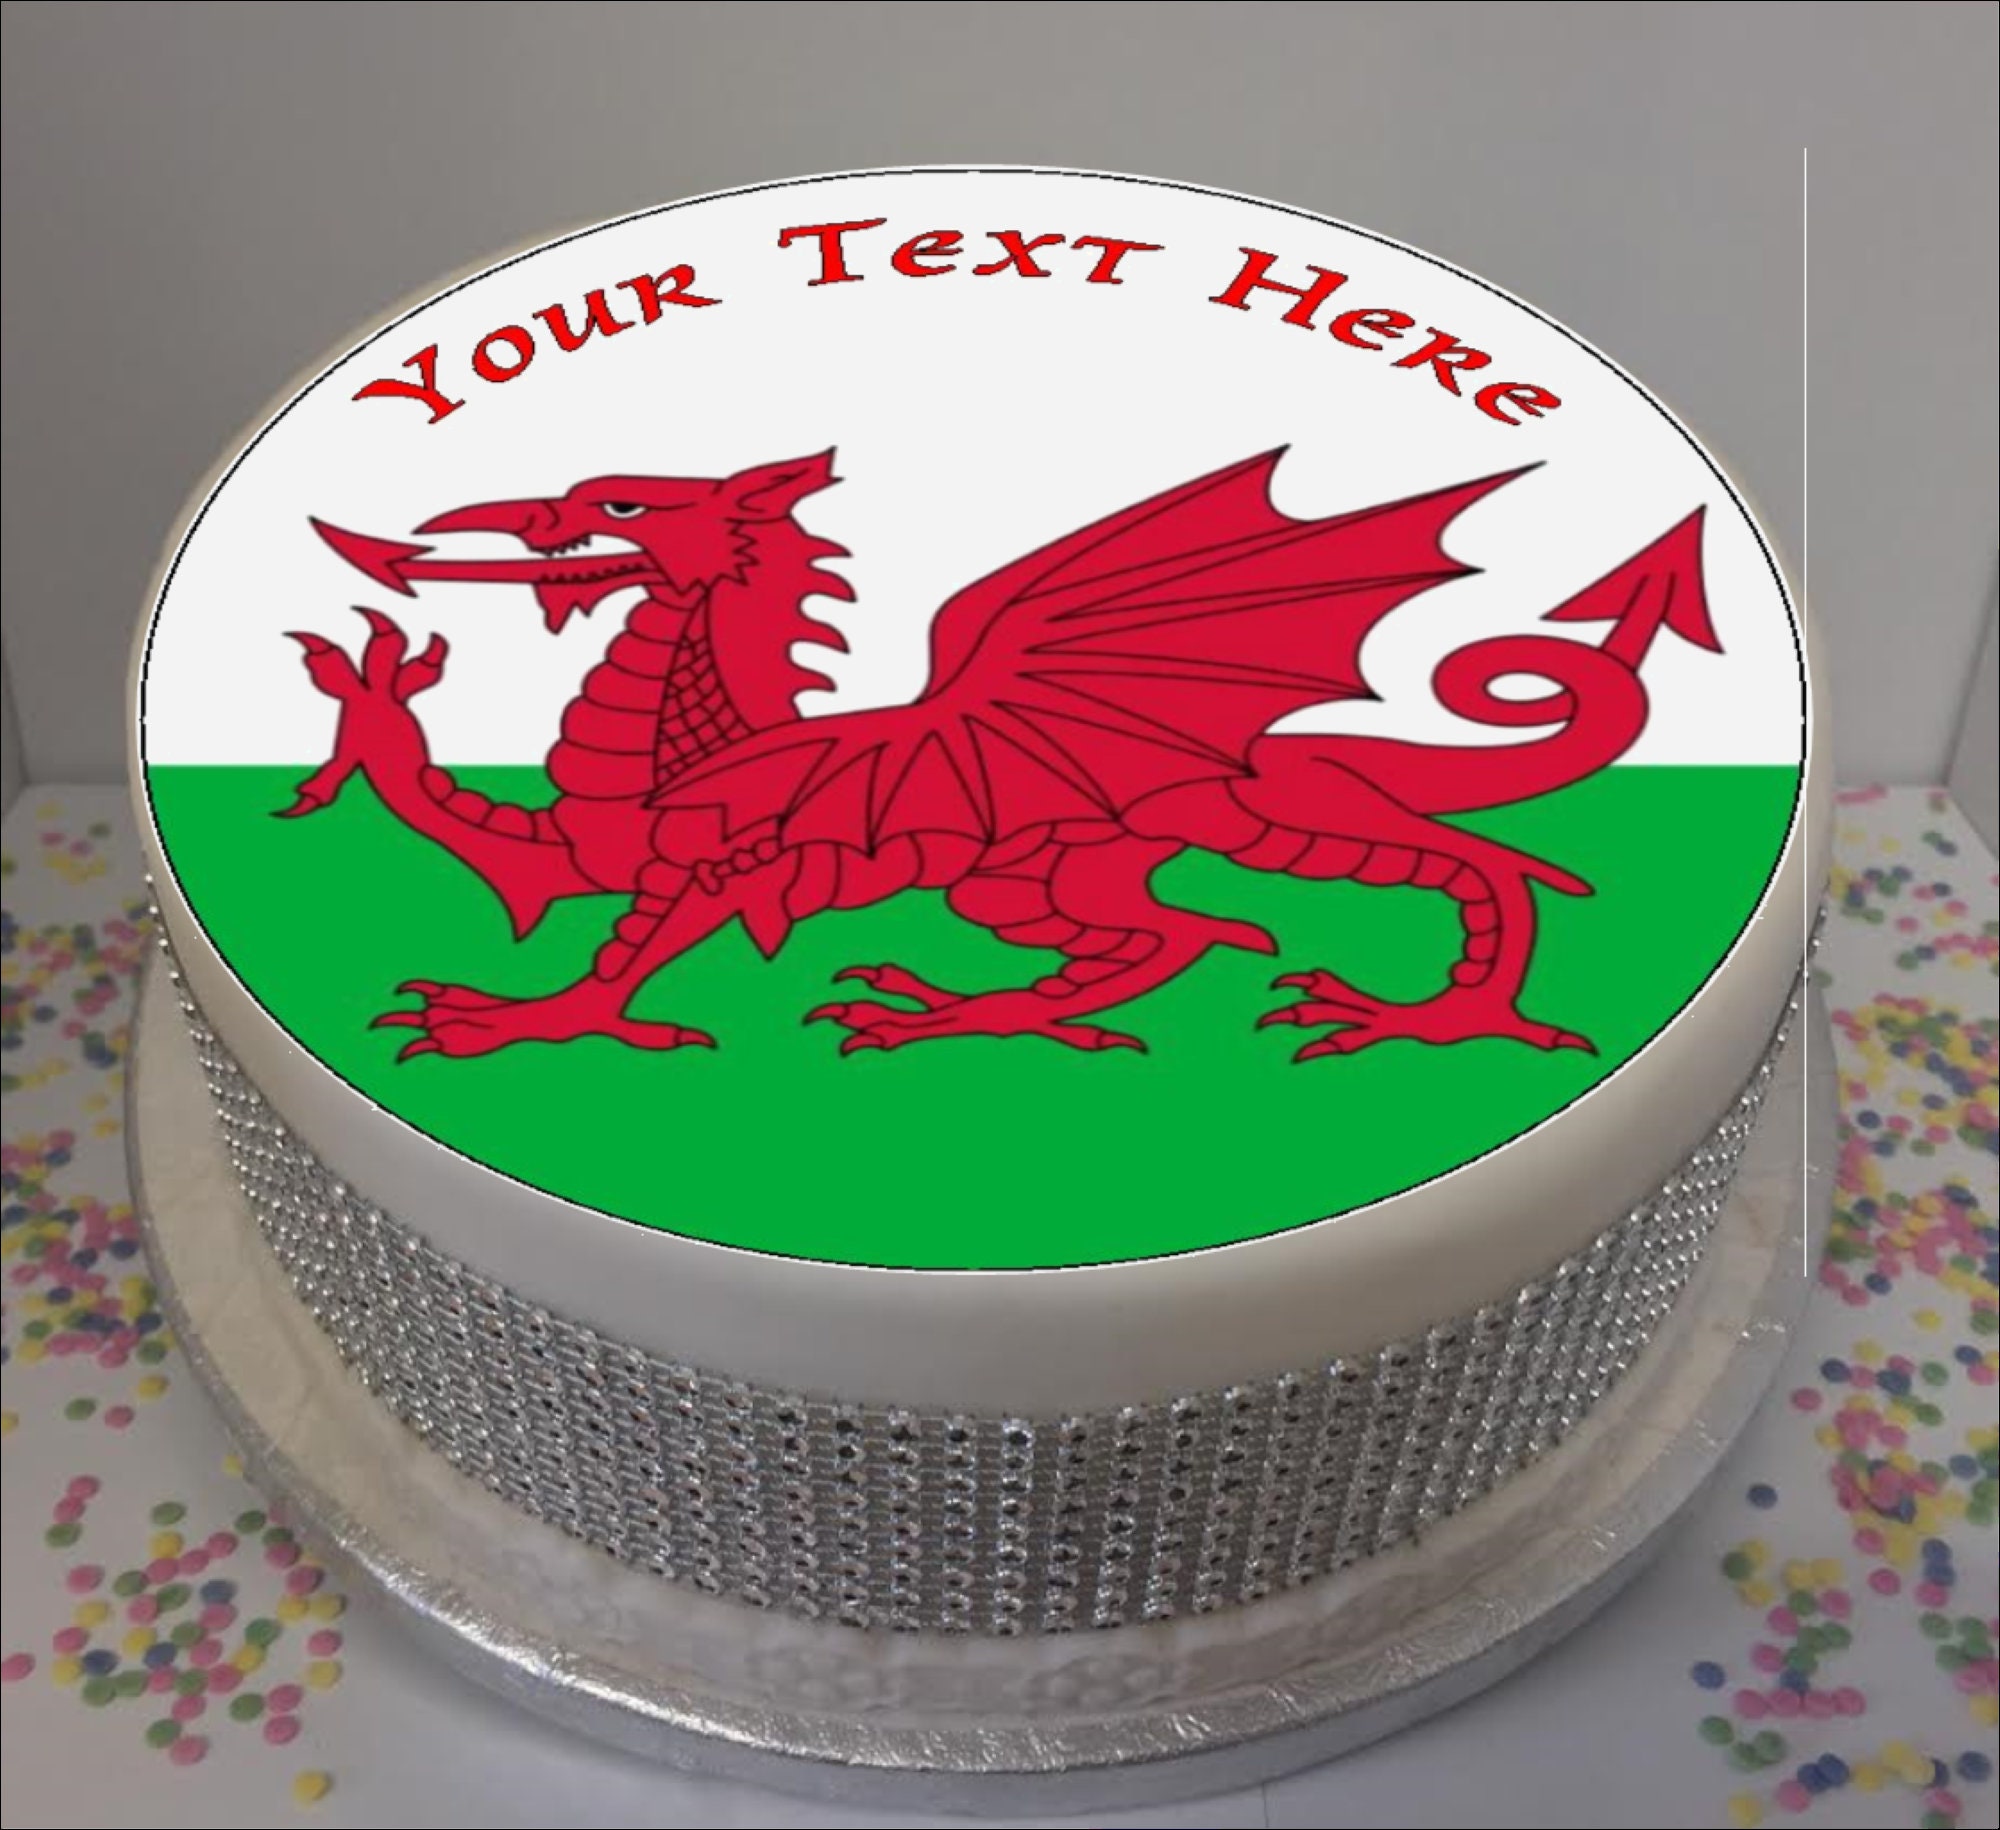 Gales comestibles Stand-Up Hada Cup Cake Toppers-EUROVISION Welsh Bandera Decoraciones 